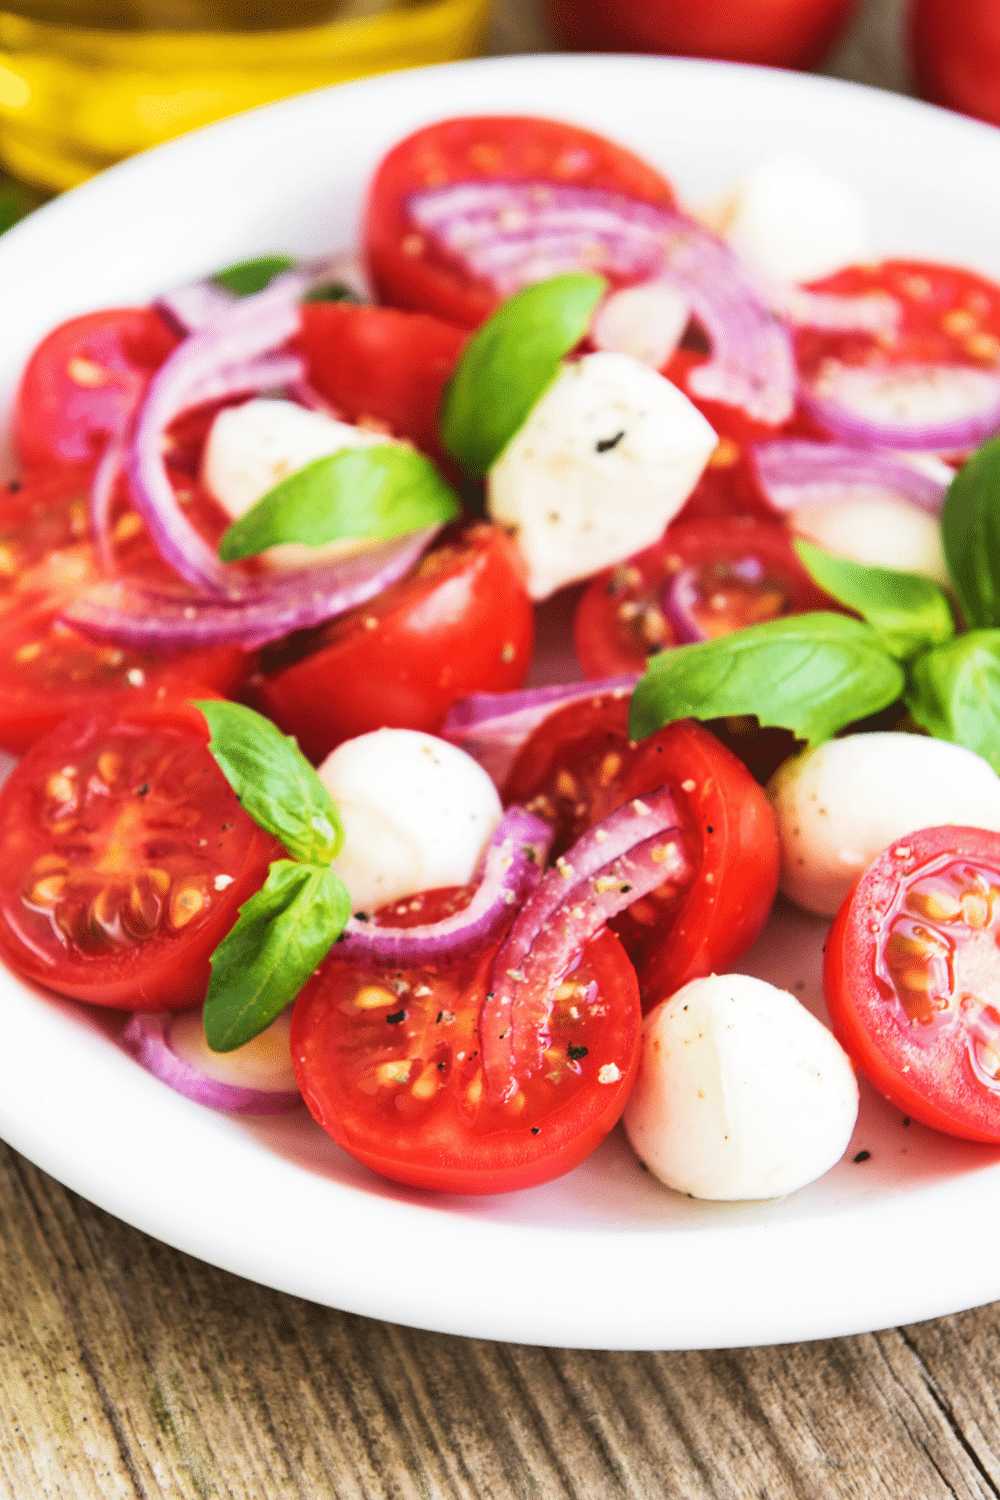 A classic Italian dish featuring sliced mozzarella, cherry tomatoes, salt, oregano, olive oil, and basil leaves. This salad is a refreshing and light option for a quick lunch.